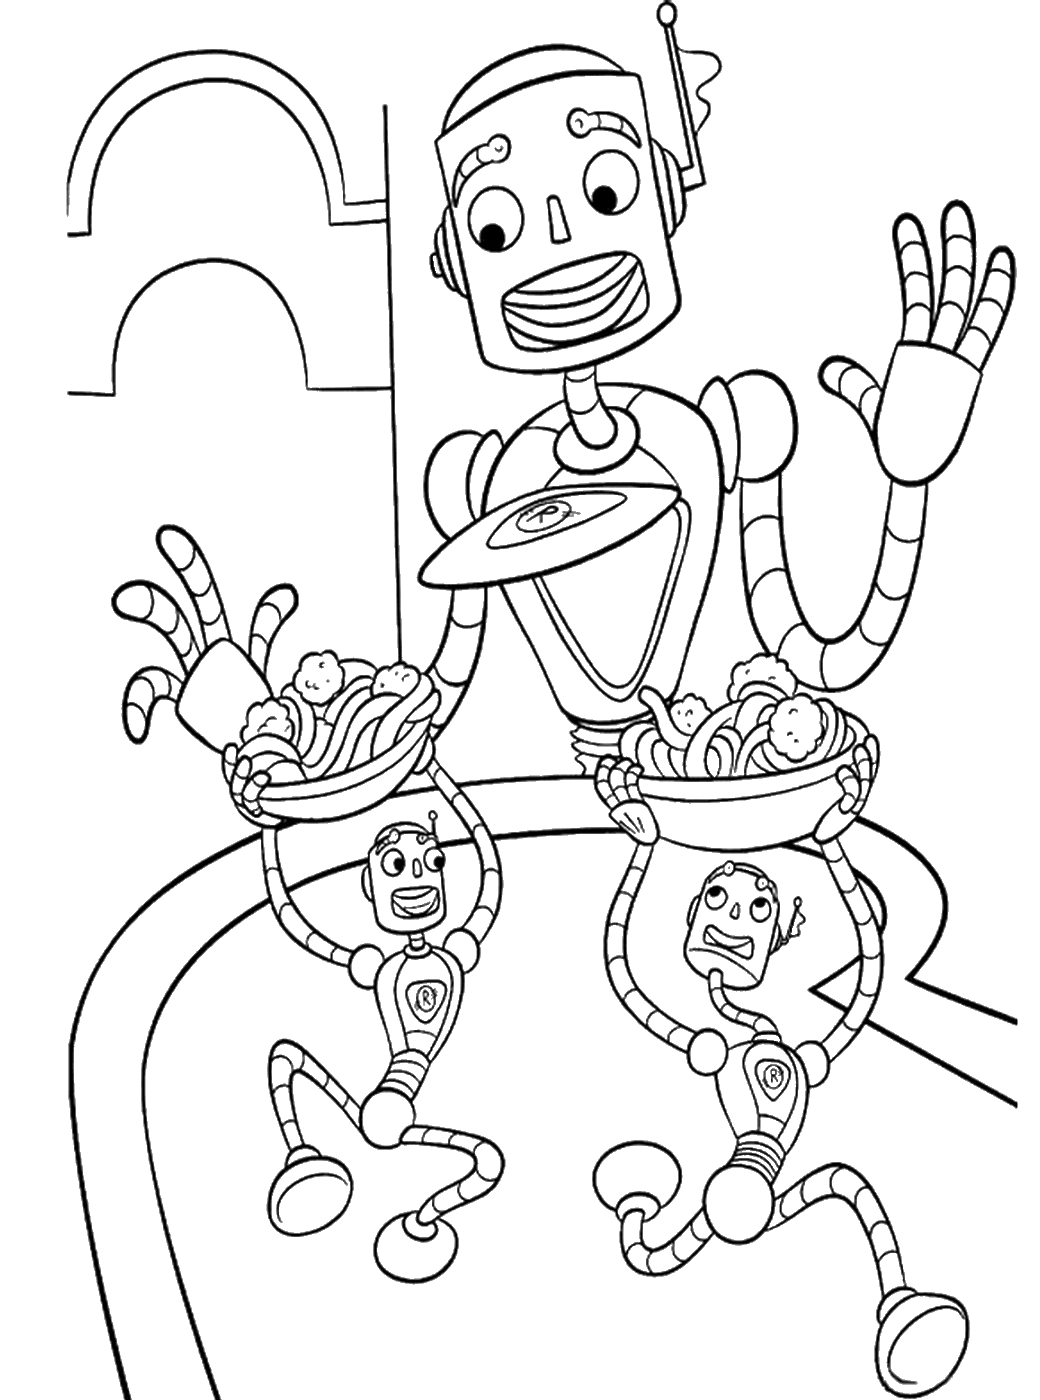 Meet the Robinsons Coloring Pages TV Film meet_the_robinsons Printable 2020 04956 Coloring4free